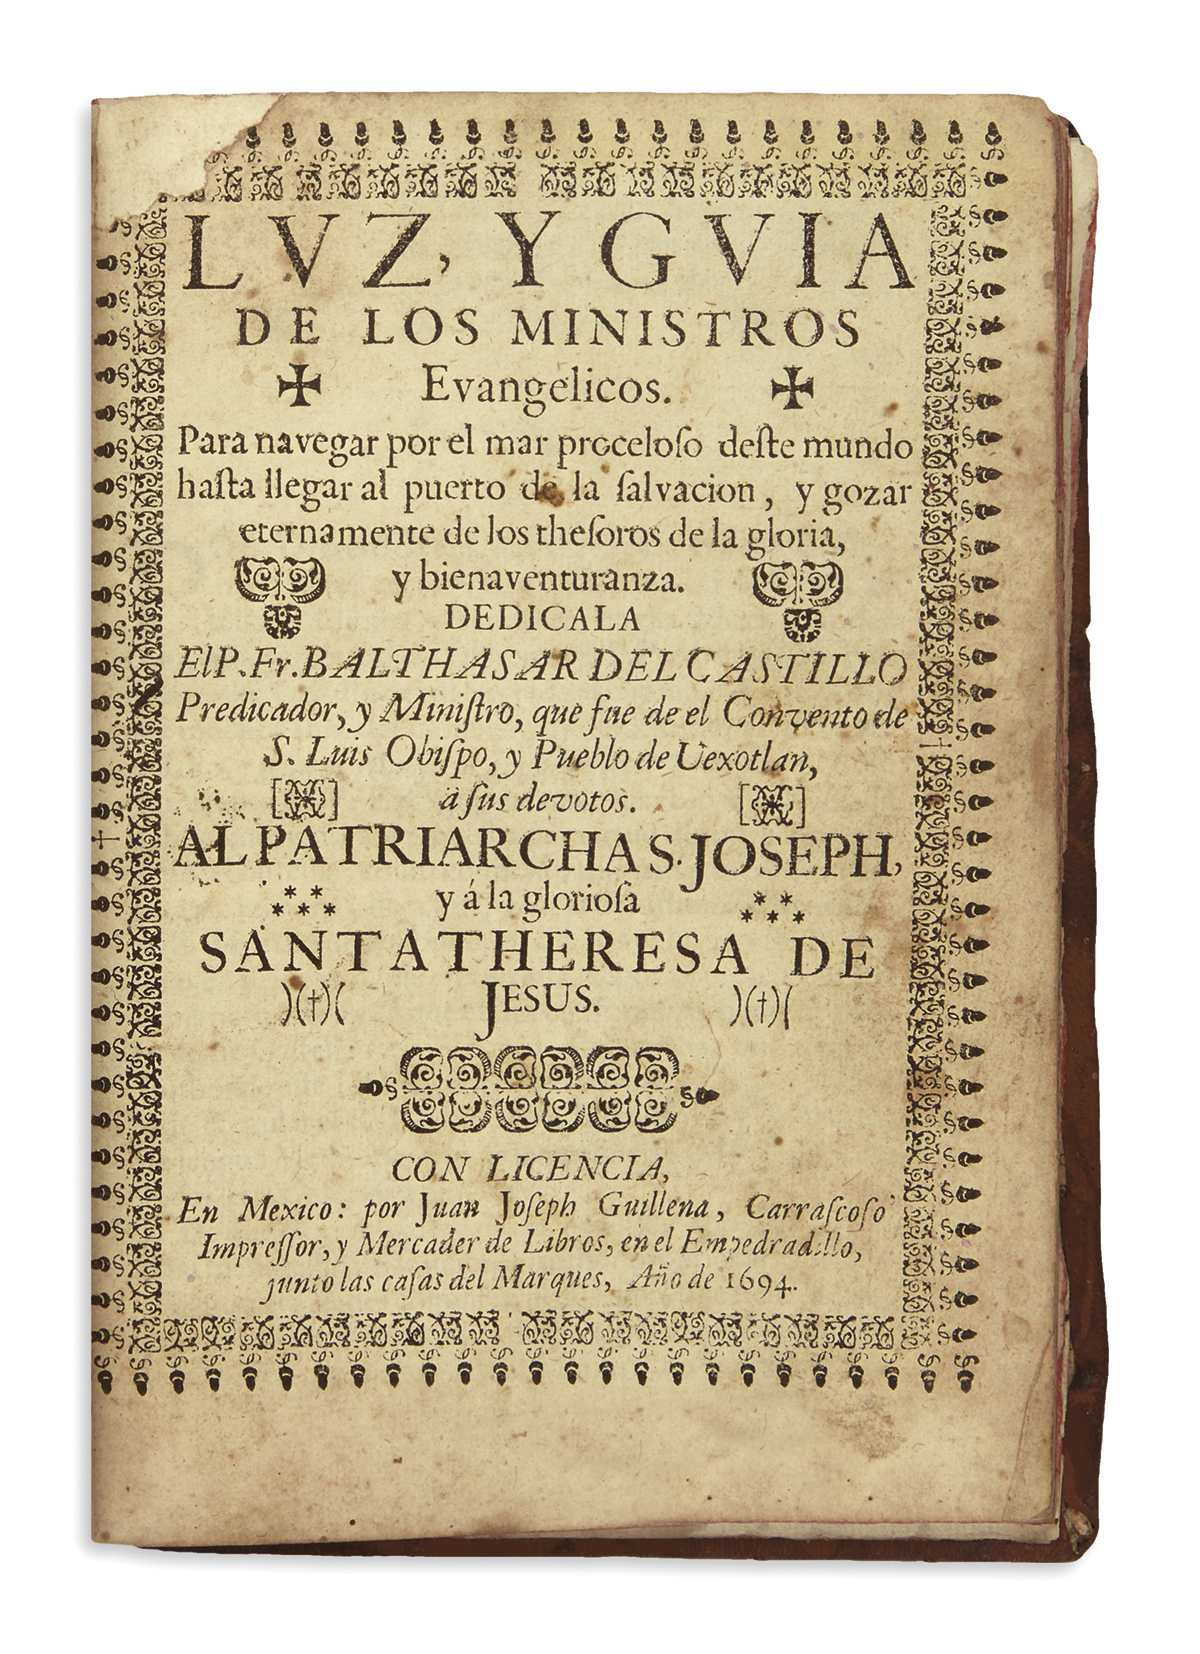 (MEXICAN IMPRINT--1694.) A pair of works on Nahuatl.